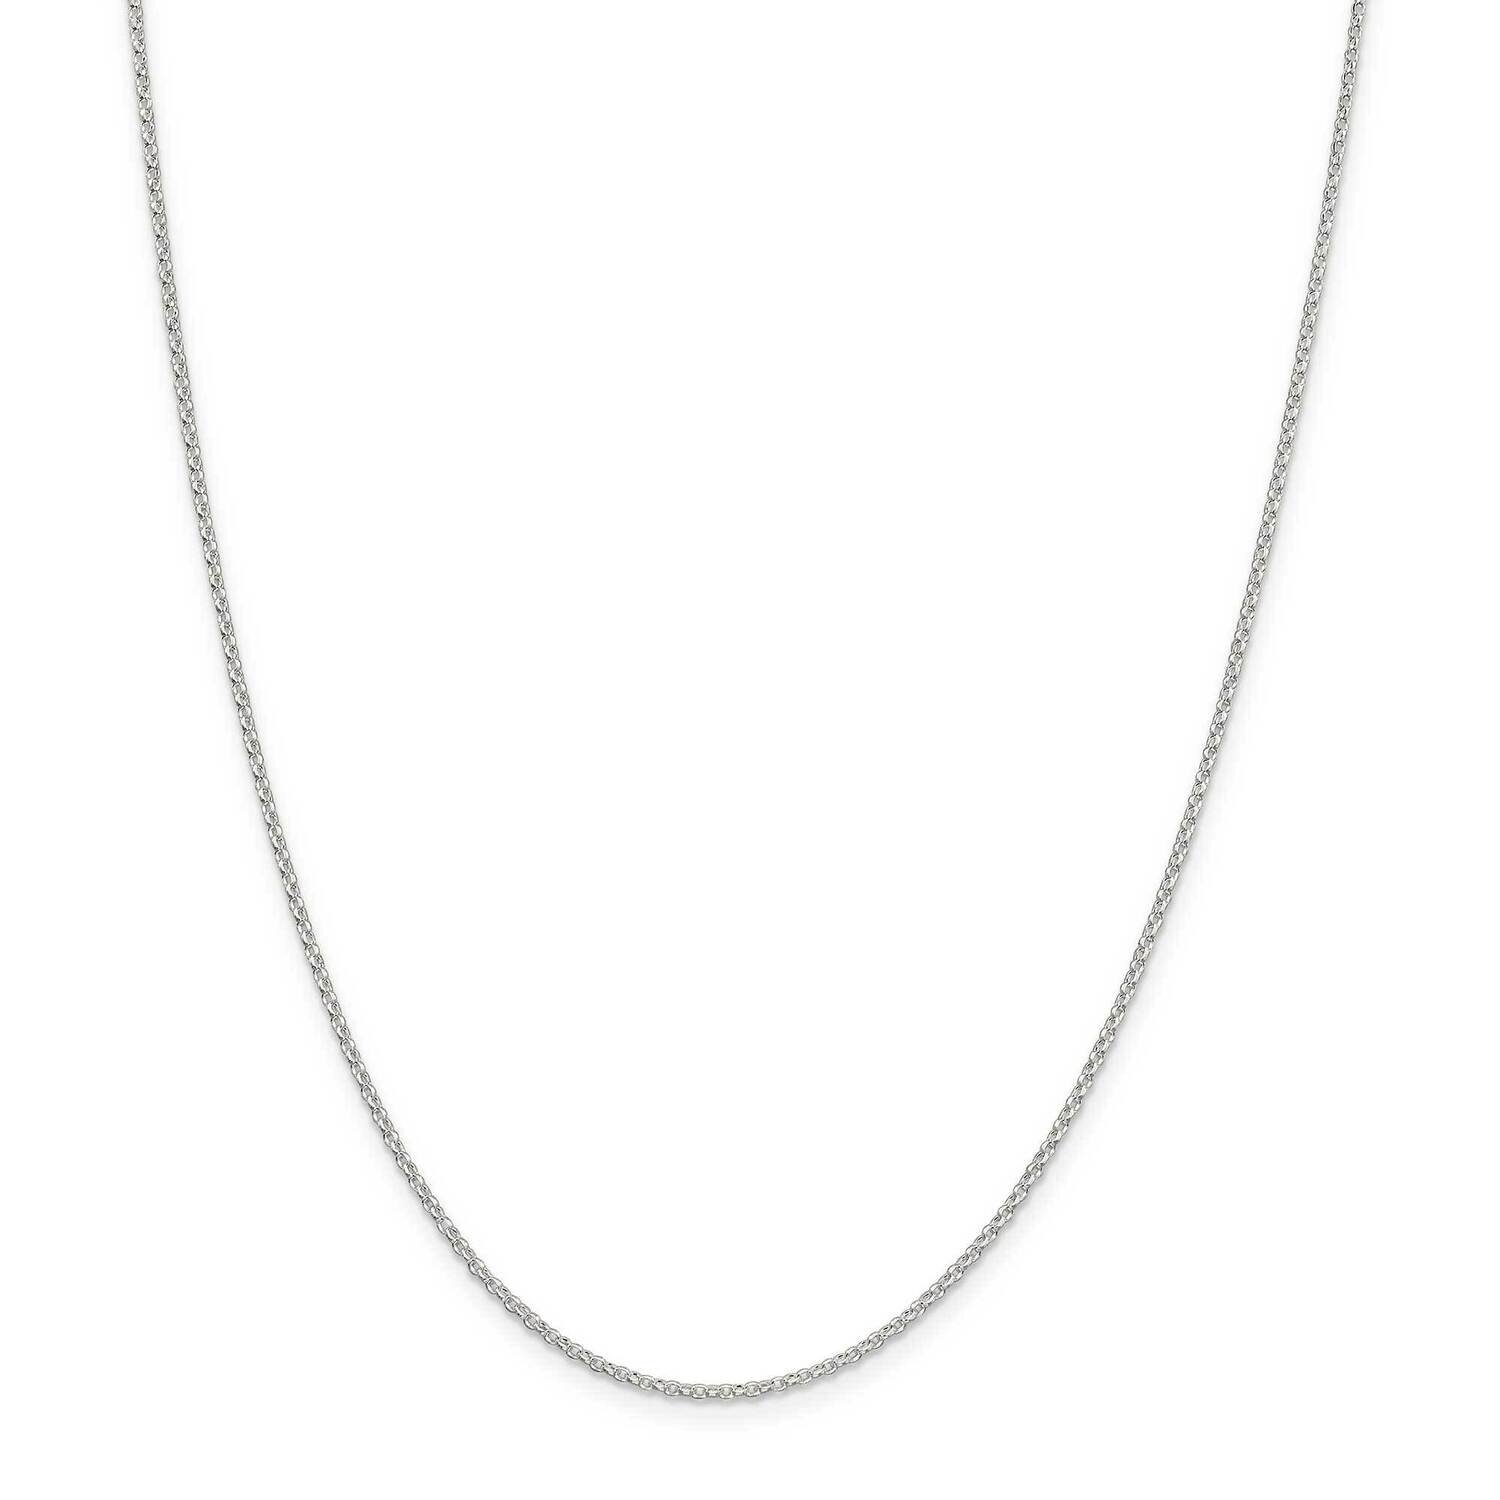 1.5mm Diamond-Cut Cable Chain 36 Inch Sterling Silver QHC022-36